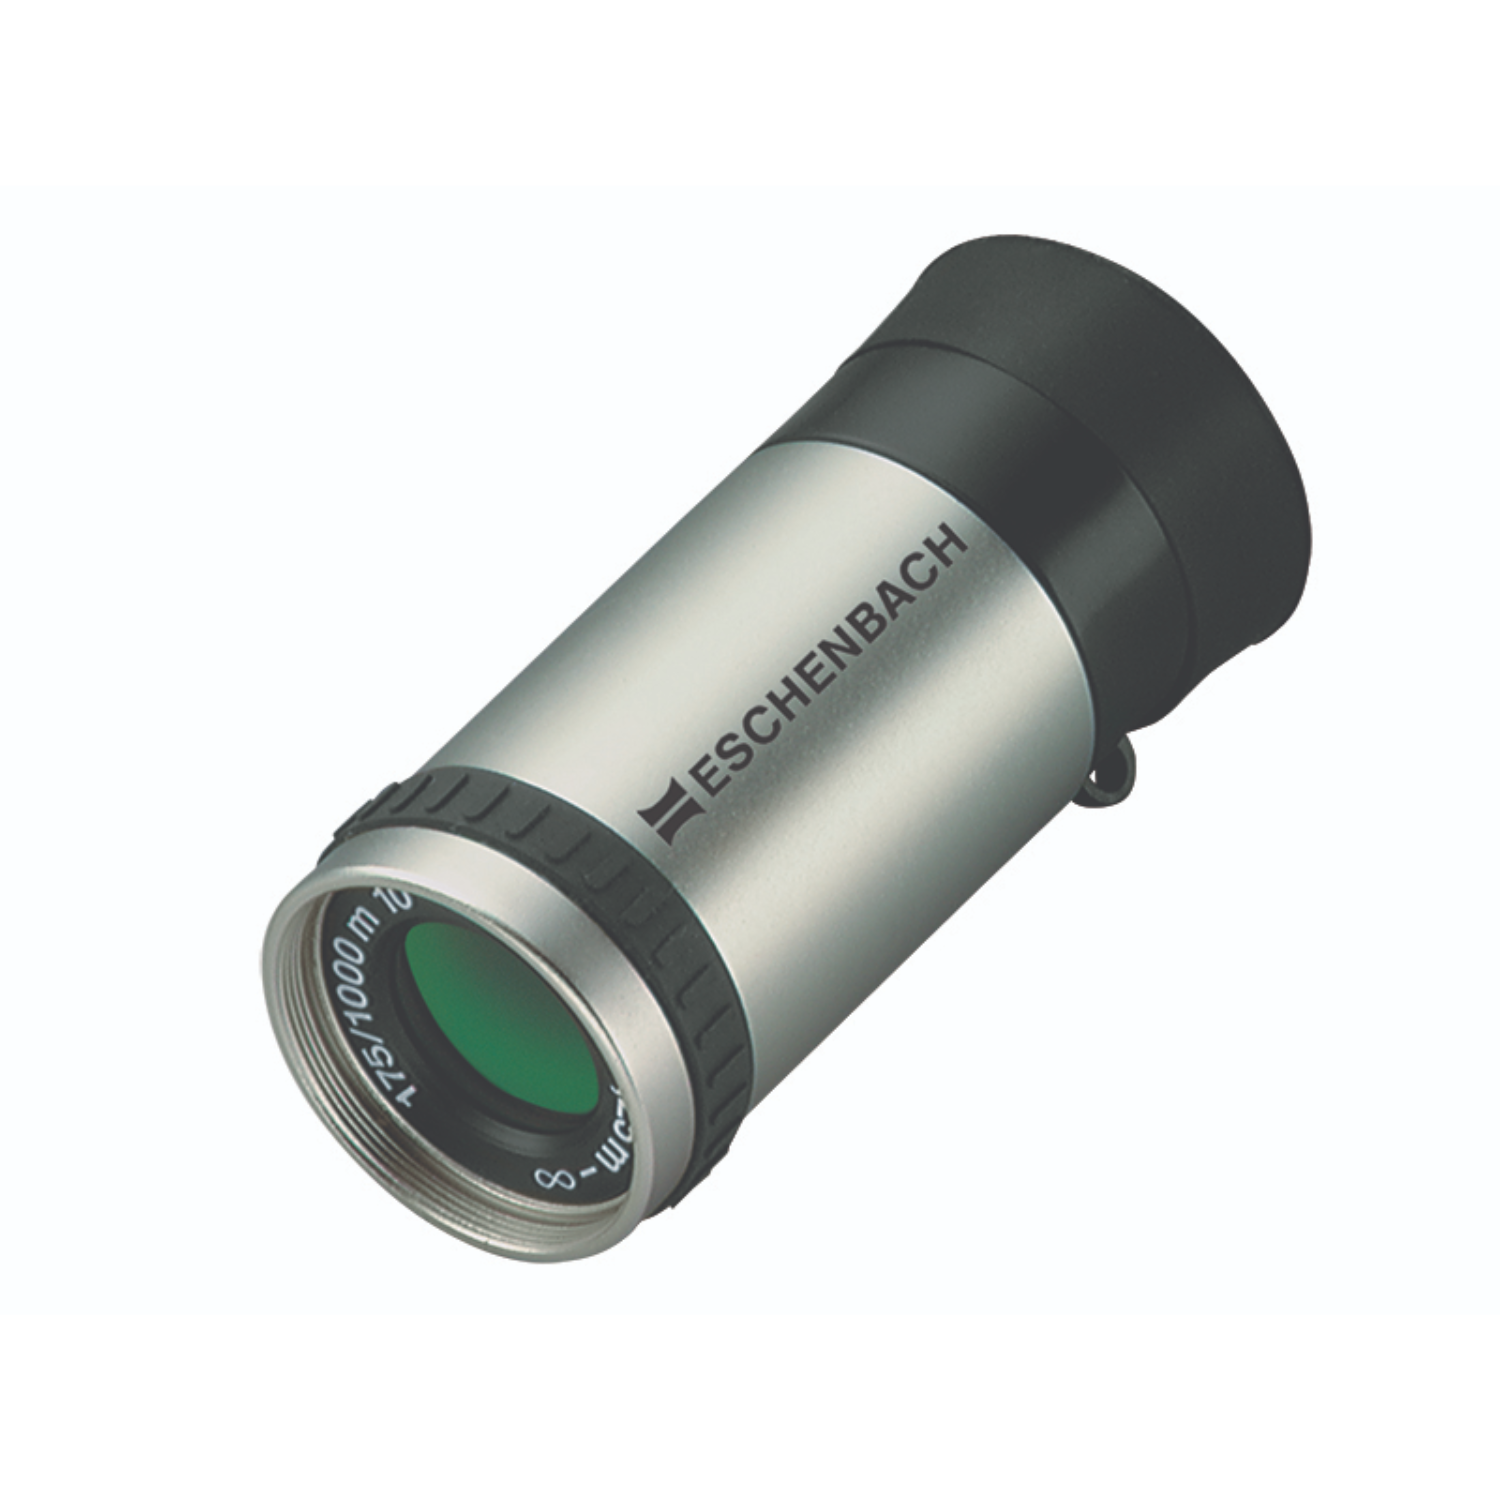 Image of the Focusable Keplerian Monocular 6x17mm from Eschenbach.